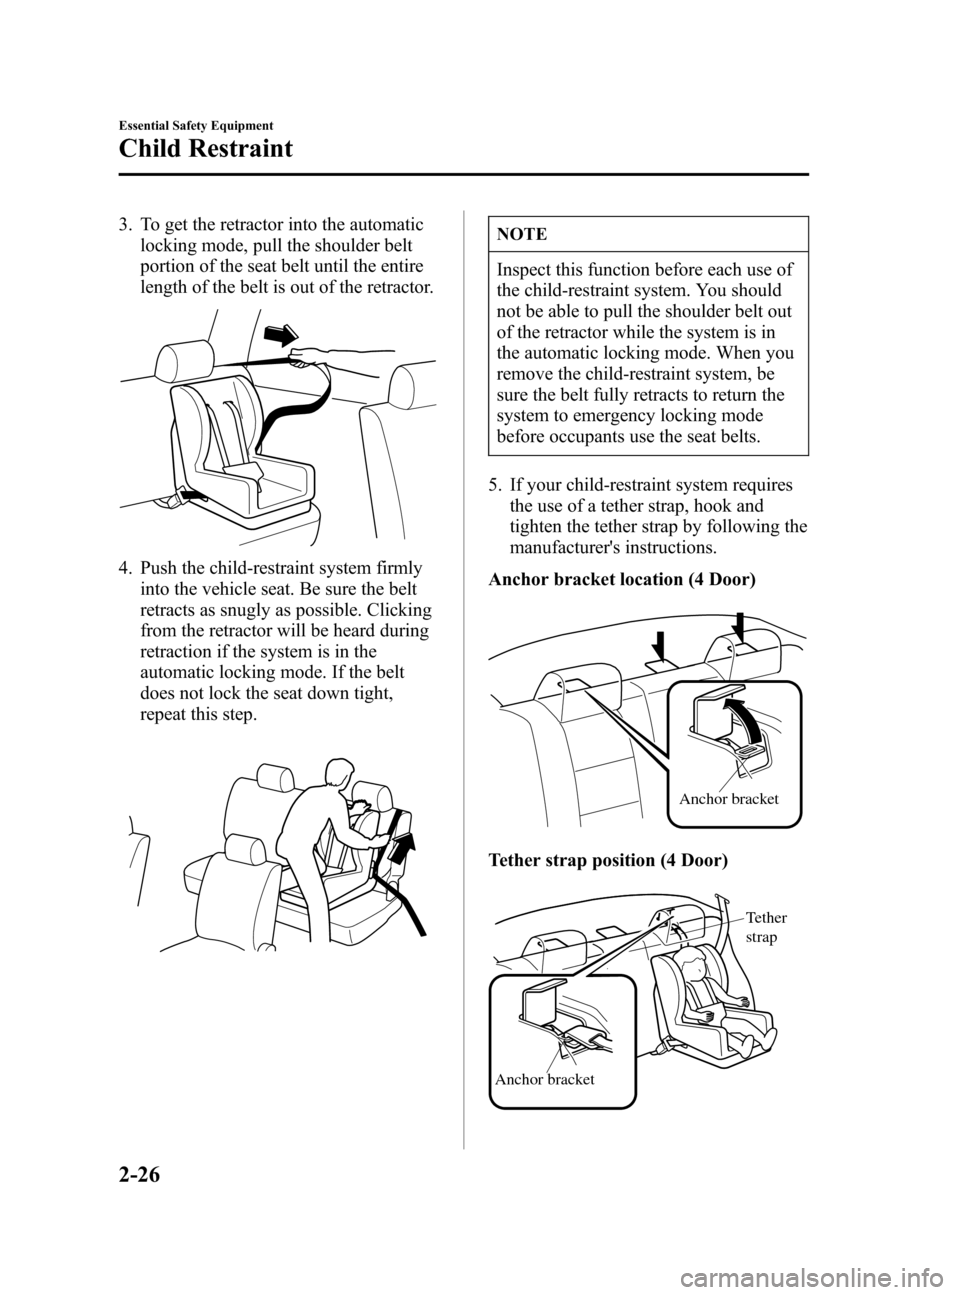 MAZDA MODEL 3 HATCHBACK 2005   (in English) Owners Guide Black plate (40,1)
3. To get the retractor into the automatic
locking mode, pull the shoulder belt
portion of the seat belt until the entire
length of the belt is out of the retractor.
4. Push the chi